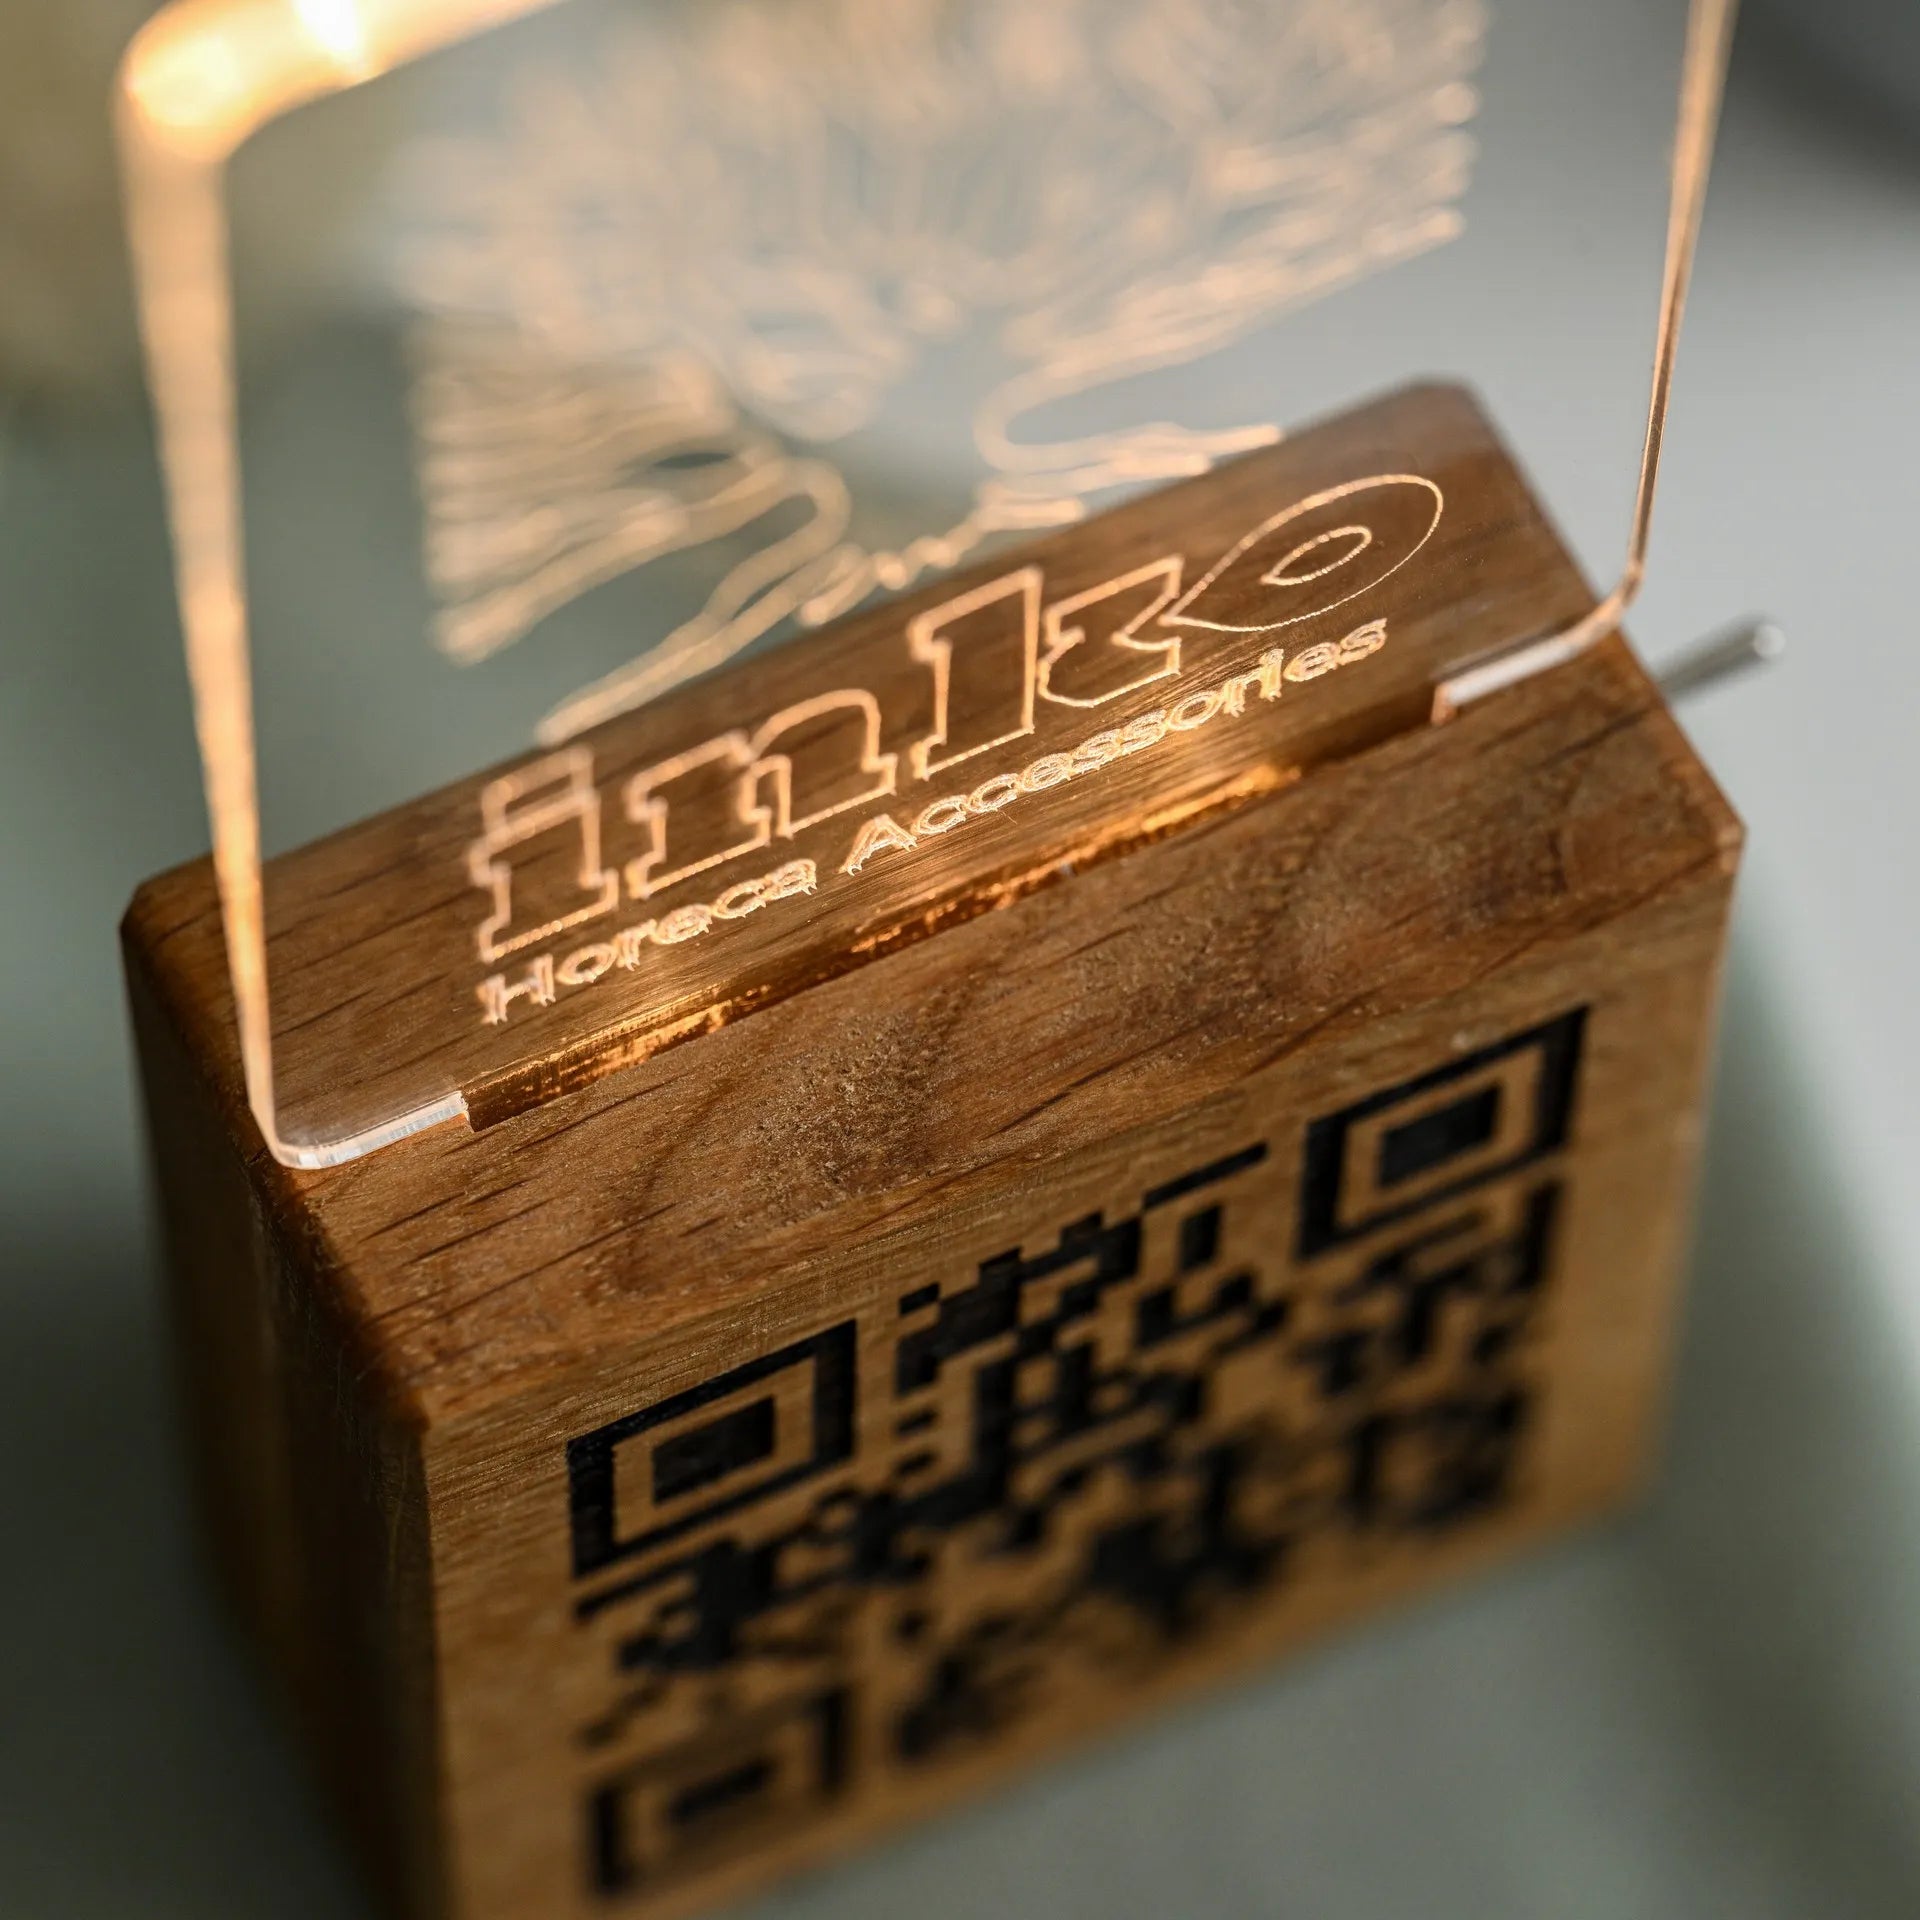 Enhance customer experience with our illuminated QR code display.